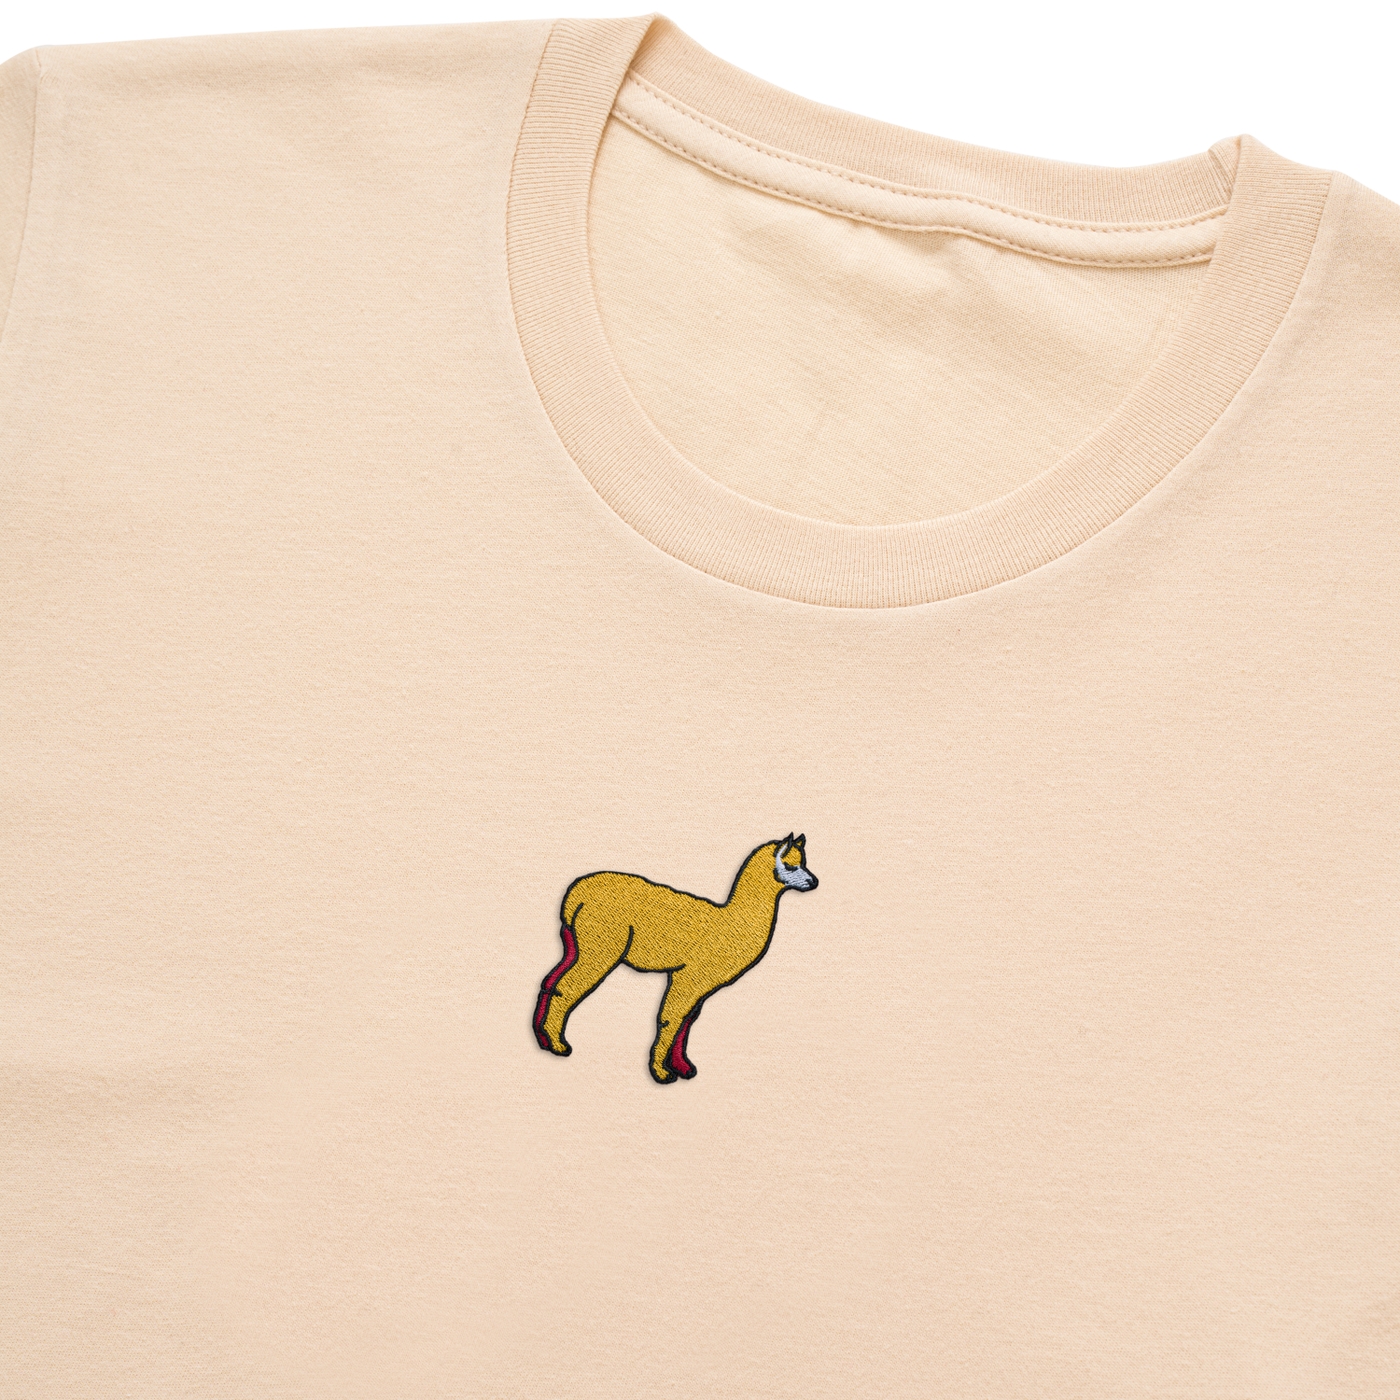 Bobby's Planet Women's Embroidered Alpaca T-Shirt from South American Amazon Animals Collection in Soft Cream Color#color_soft-cream